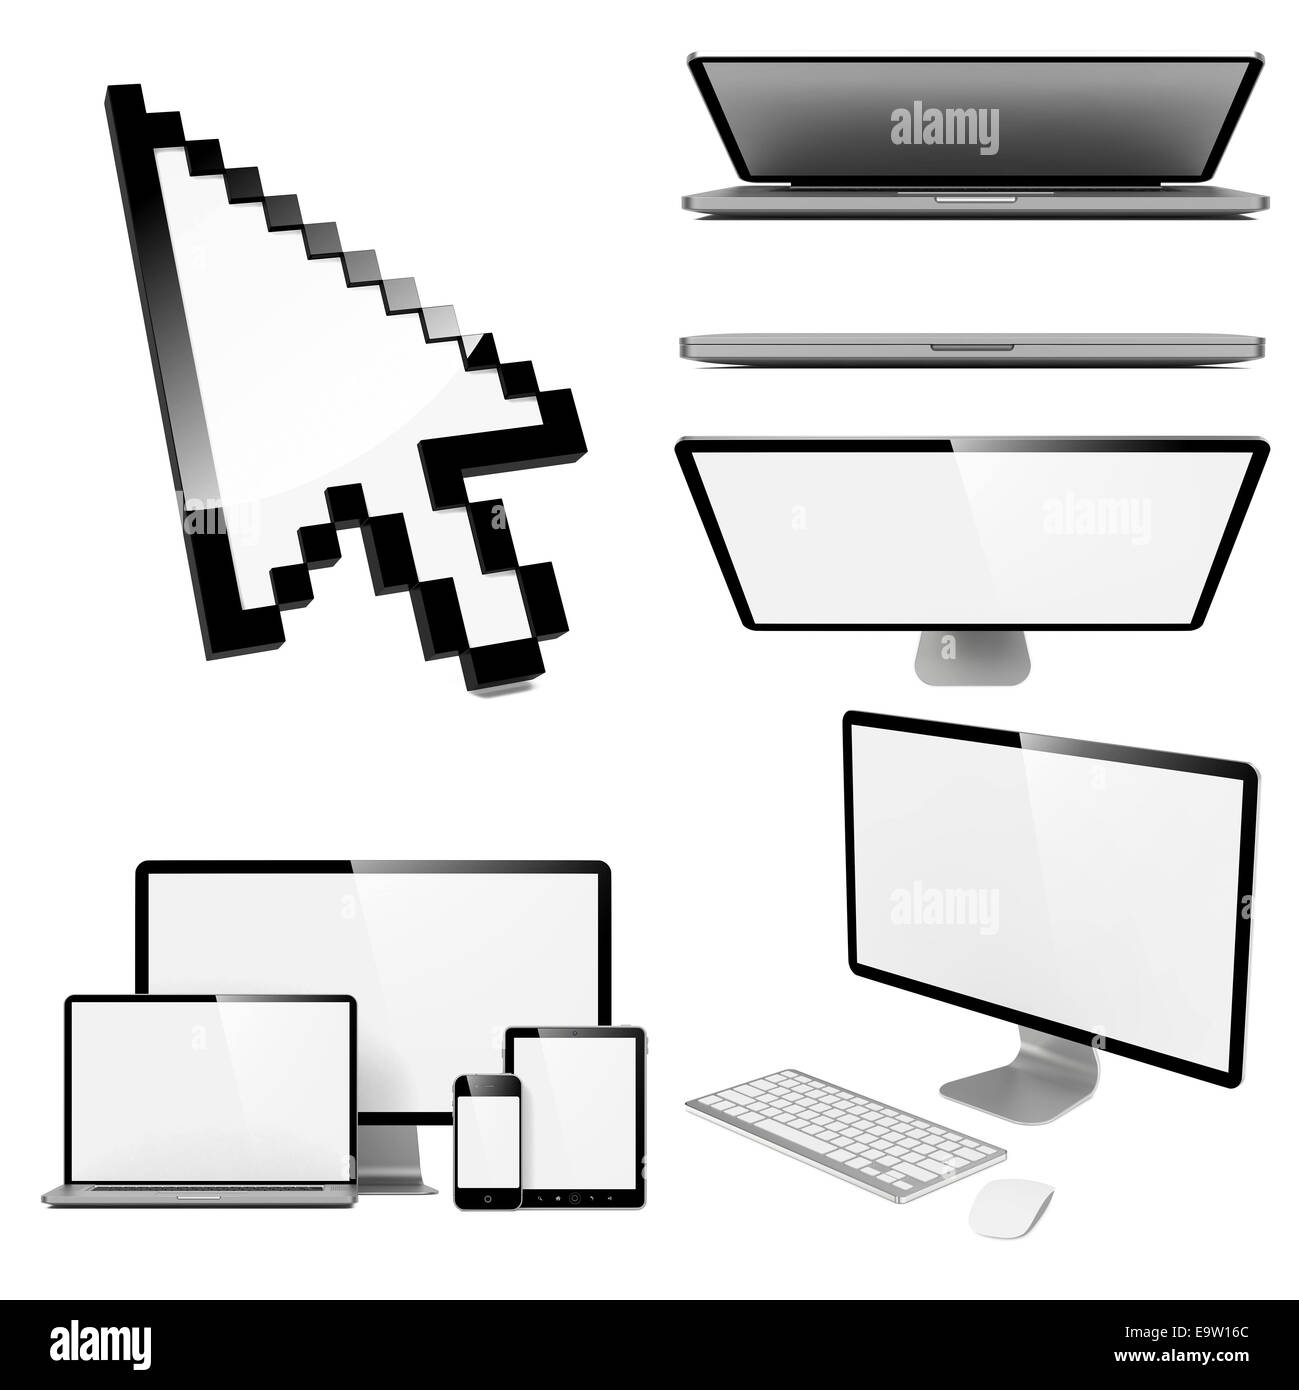 Modern Gadgets Concepts - Set of 3D Computer Monitor, Laptop, Tablet, Smartphones in Different Projections. Stock Photo